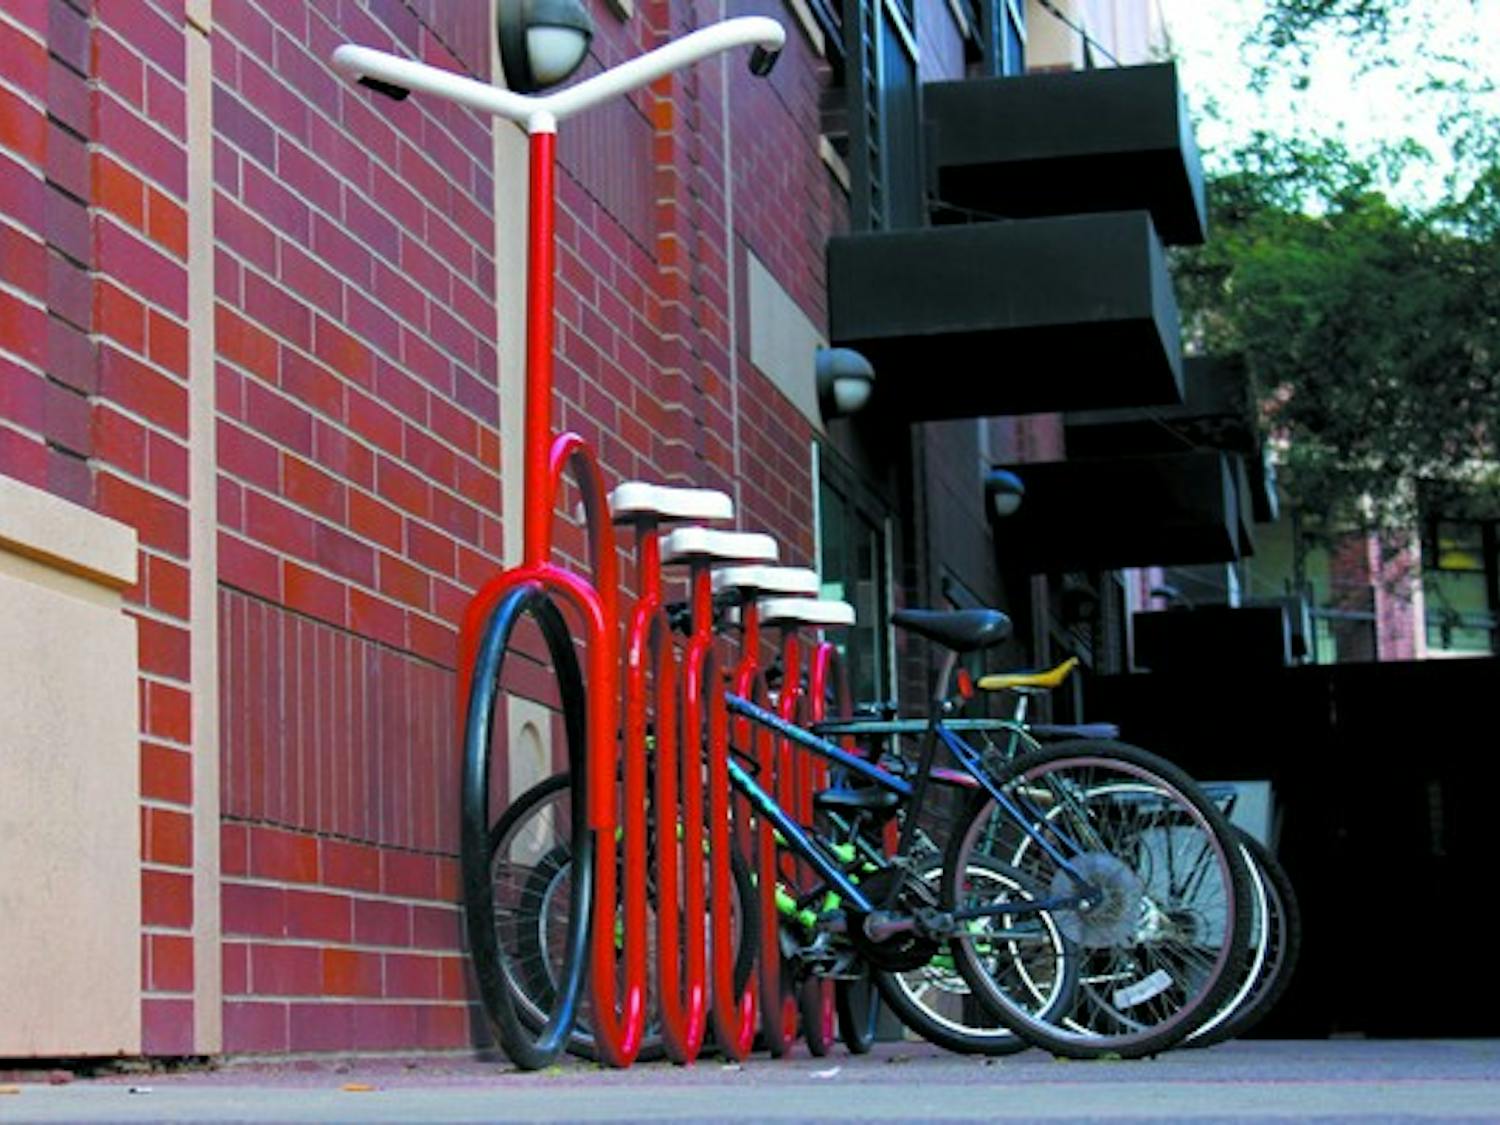 LOCK IT UP: A unique bike rack allows visitors to Tempe's Mill Avenue to park their bikes and enjoy the sights. (Photo by Sam Rosenbaum)